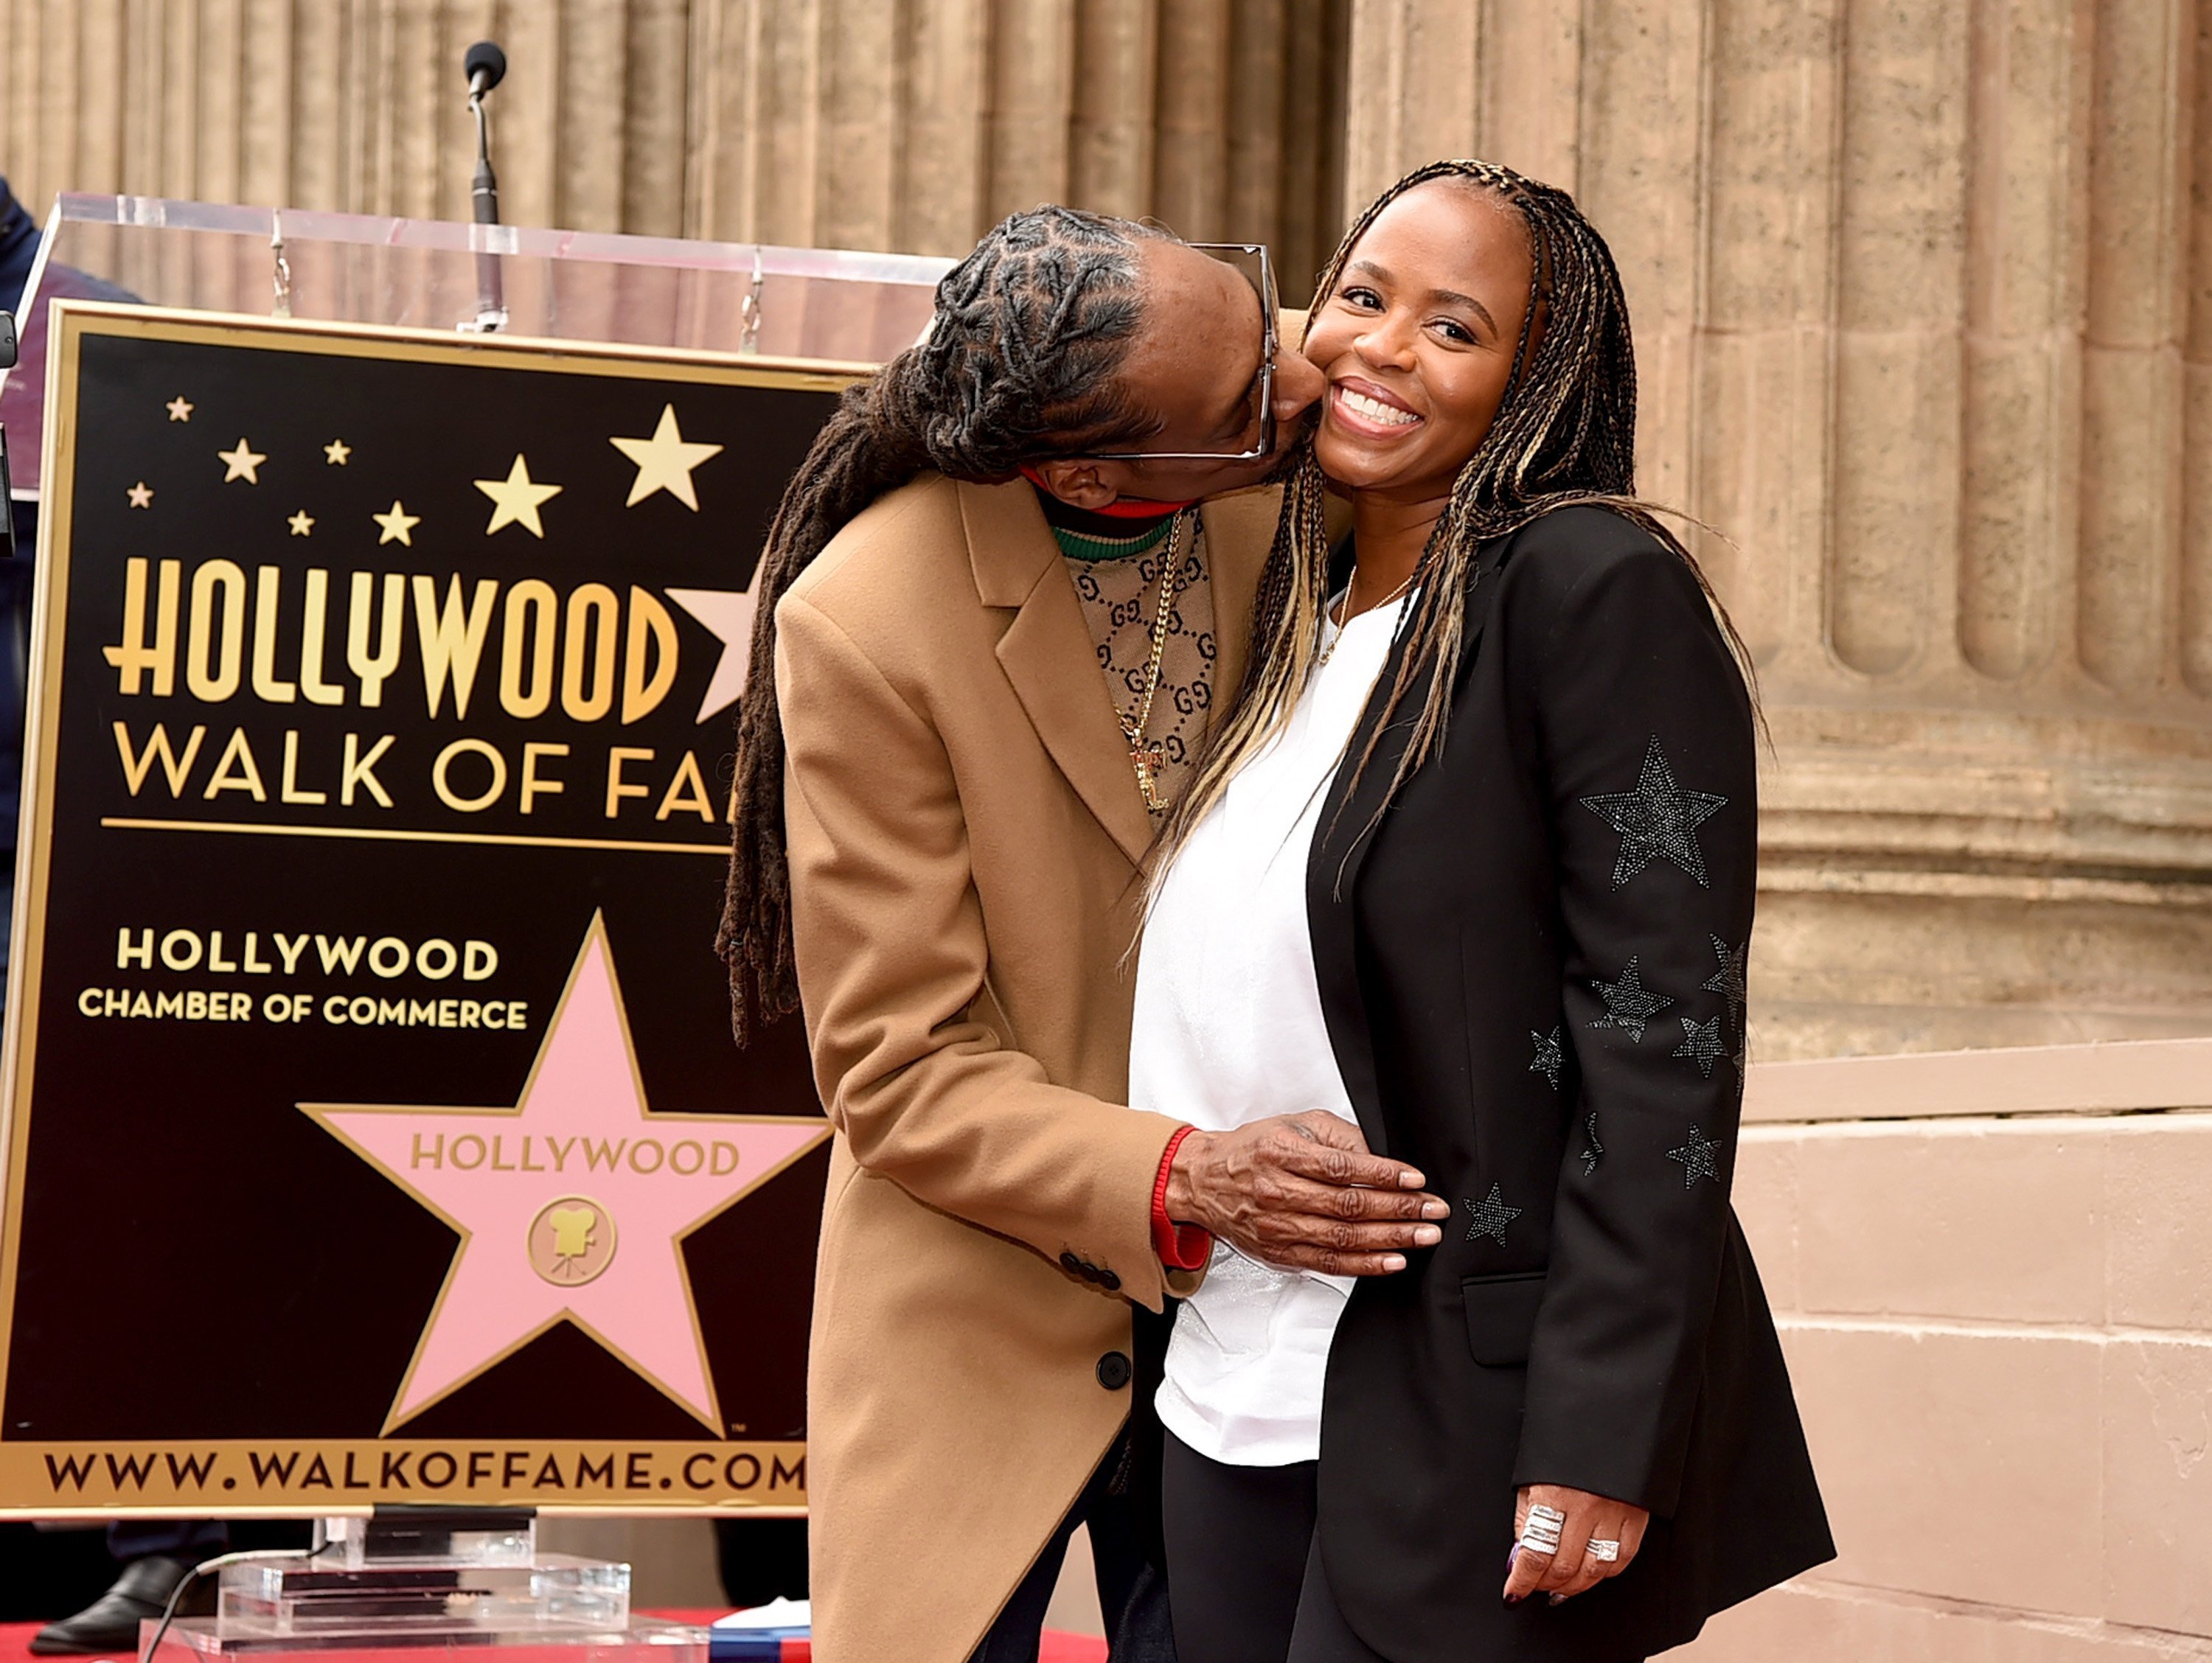 Snoop Dogg, with his wife Shante Broadus, is honored with a star on The Hollywood Walk Of Fame on Hollywood Boulevard on November 19, 2018. | Source: Getty Images